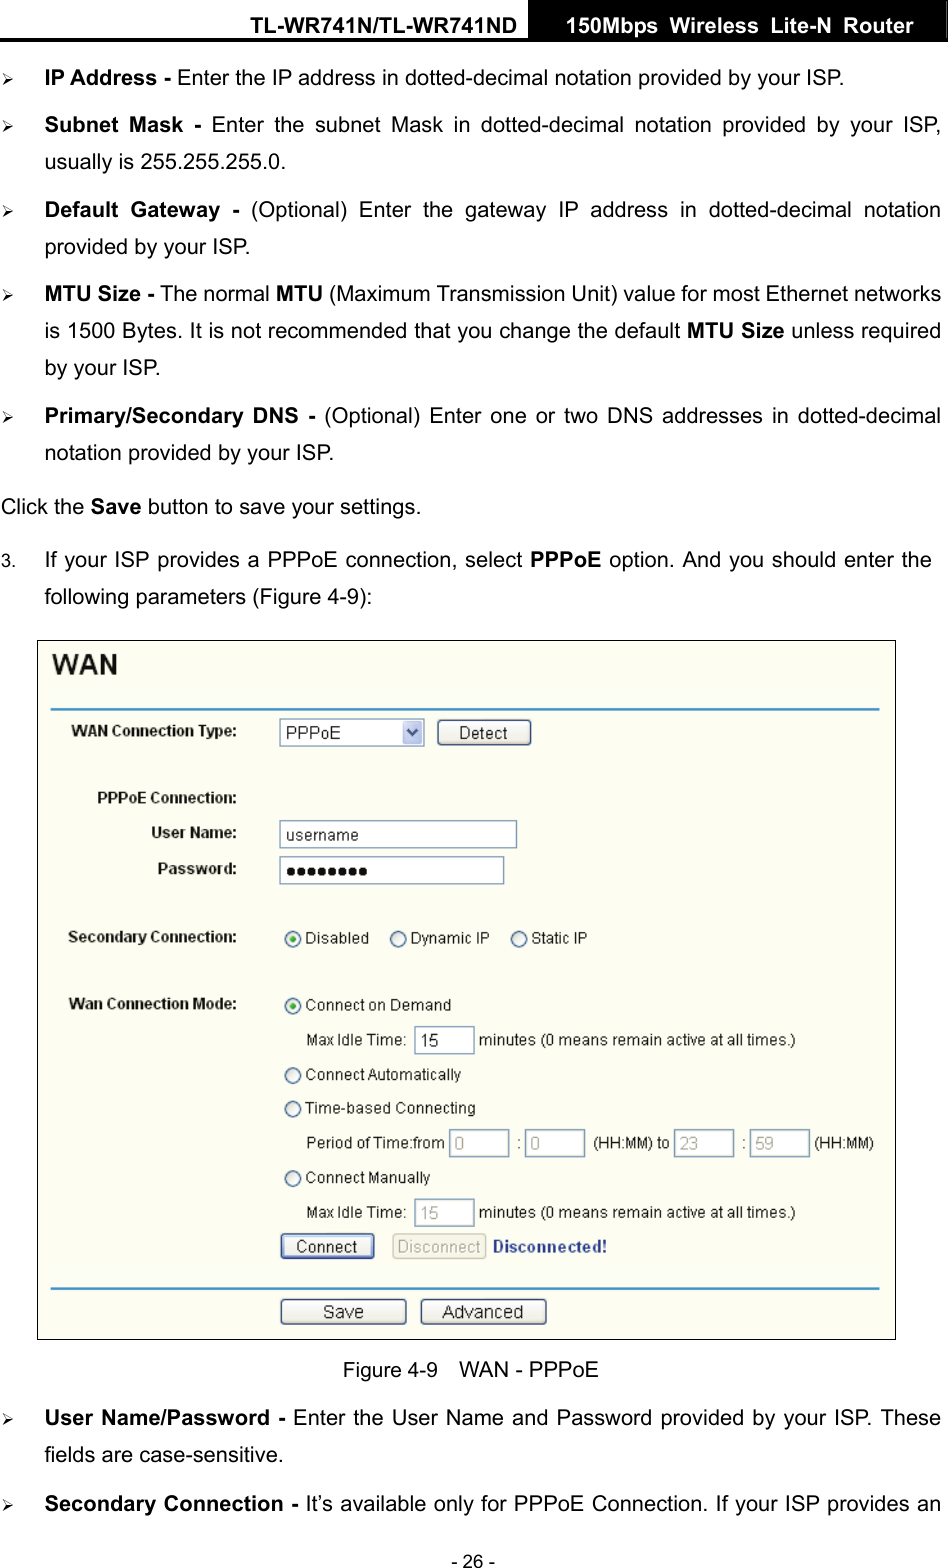 TL-WR741N/TL-WR741ND  150Mbps Wireless Lite-N Router   - 26 - ¾ IP Address - Enter the IP address in dotted-decimal notation provided by your ISP. ¾ Subnet Mask - Enter the subnet Mask in dotted-decimal notation provided by your ISP, usually is 255.255.255.0. ¾ Default Gateway - (Optional) Enter the gateway IP address in dotted-decimal notation provided by your ISP. ¾ MTU Size - The normal MTU (Maximum Transmission Unit) value for most Ethernet networks is 1500 Bytes. It is not recommended that you change the default MTU Size unless required by your ISP.   ¾ Primary/Secondary DNS - (Optional) Enter one or two DNS addresses in dotted-decimal notation provided by your ISP. Click the Save button to save your settings. 3.  If your ISP provides a PPPoE connection, select PPPoE option. And you should enter the following parameters (Figure 4-9):  Figure 4-9    WAN - PPPoE ¾ User Name/Password - Enter the User Name and Password provided by your ISP. These fields are case-sensitive. ¾ Secondary Connection - It’s available only for PPPoE Connection. If your ISP provides an 